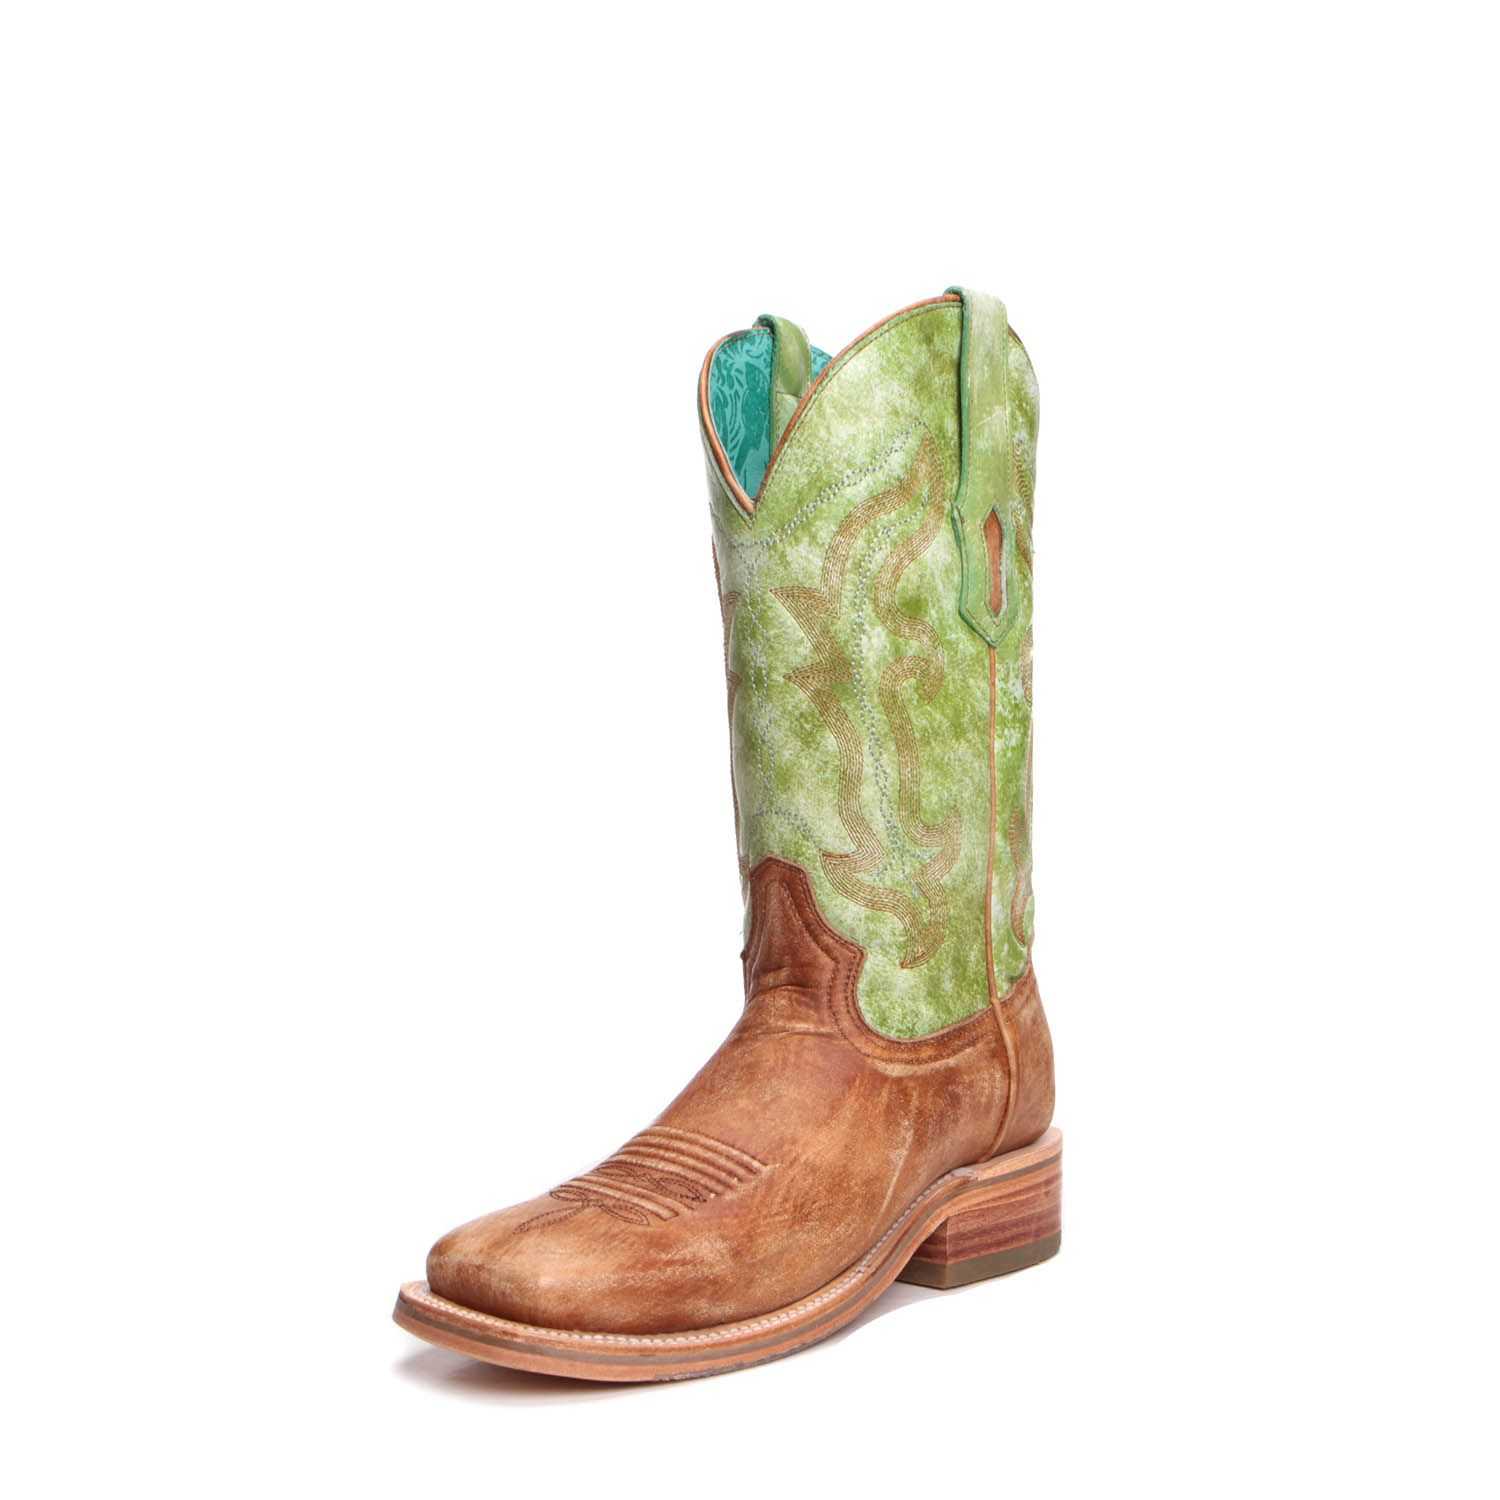 Verbinding Verwacht het Rodeo Corral Womens Lime Green Cowboy Boots A4102